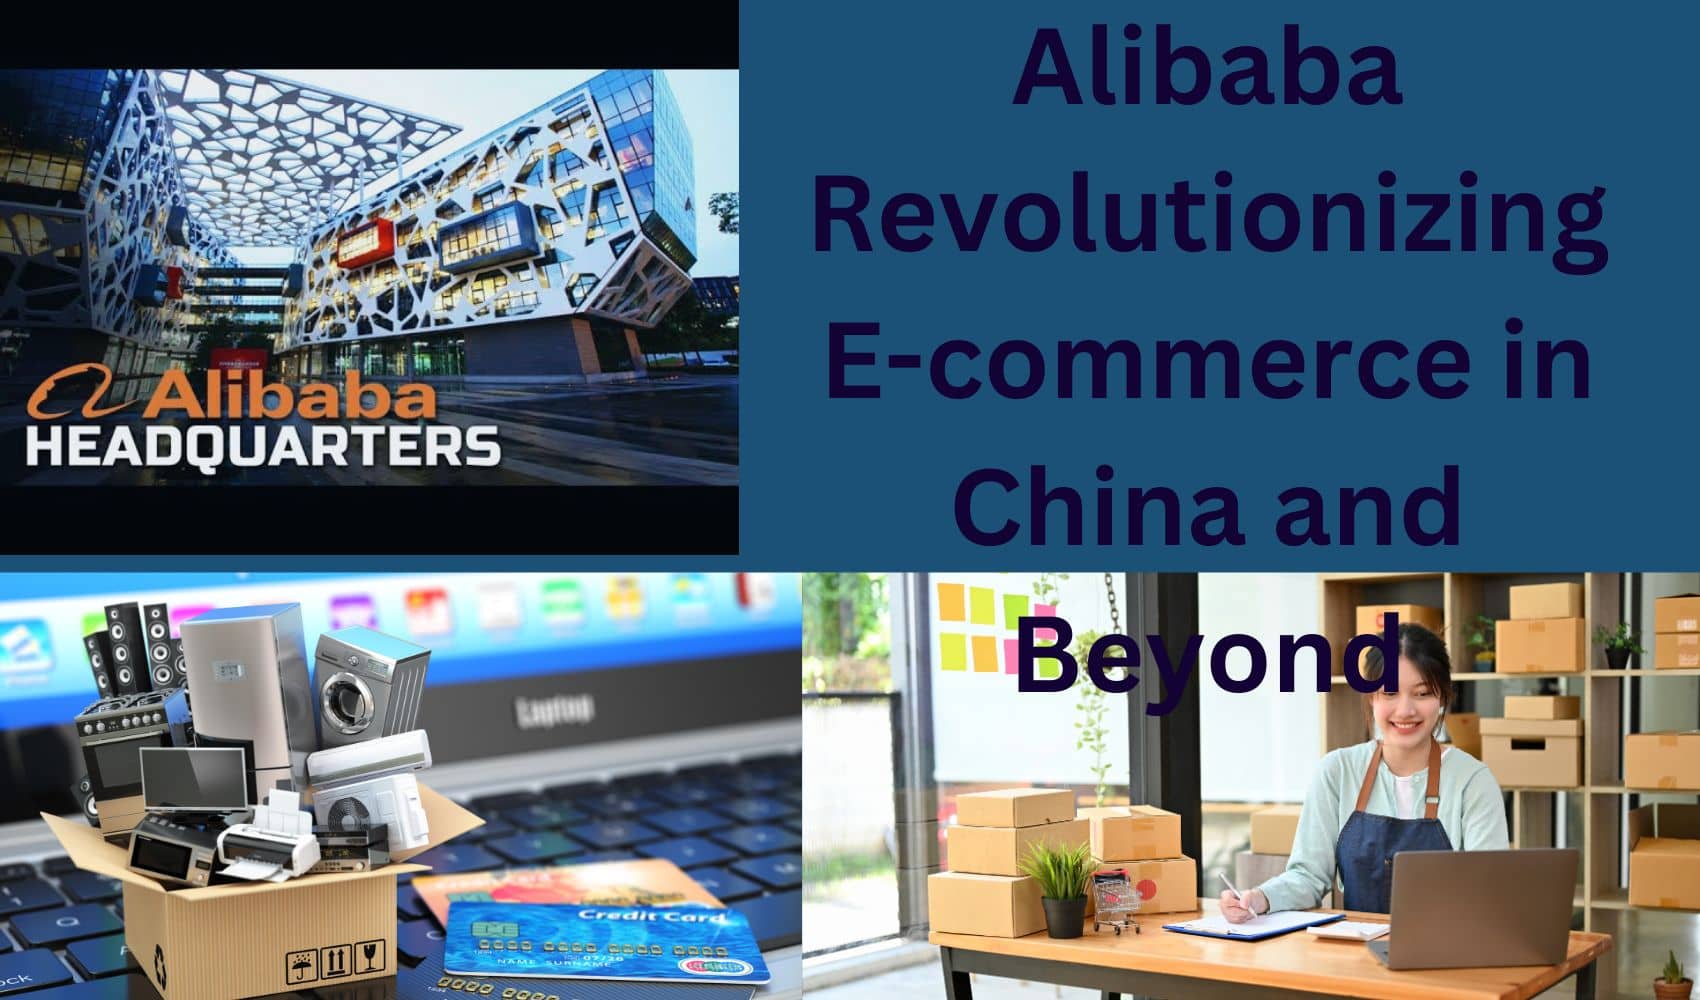 Alibaba Revolutionizing E-commerce in China and Beyond